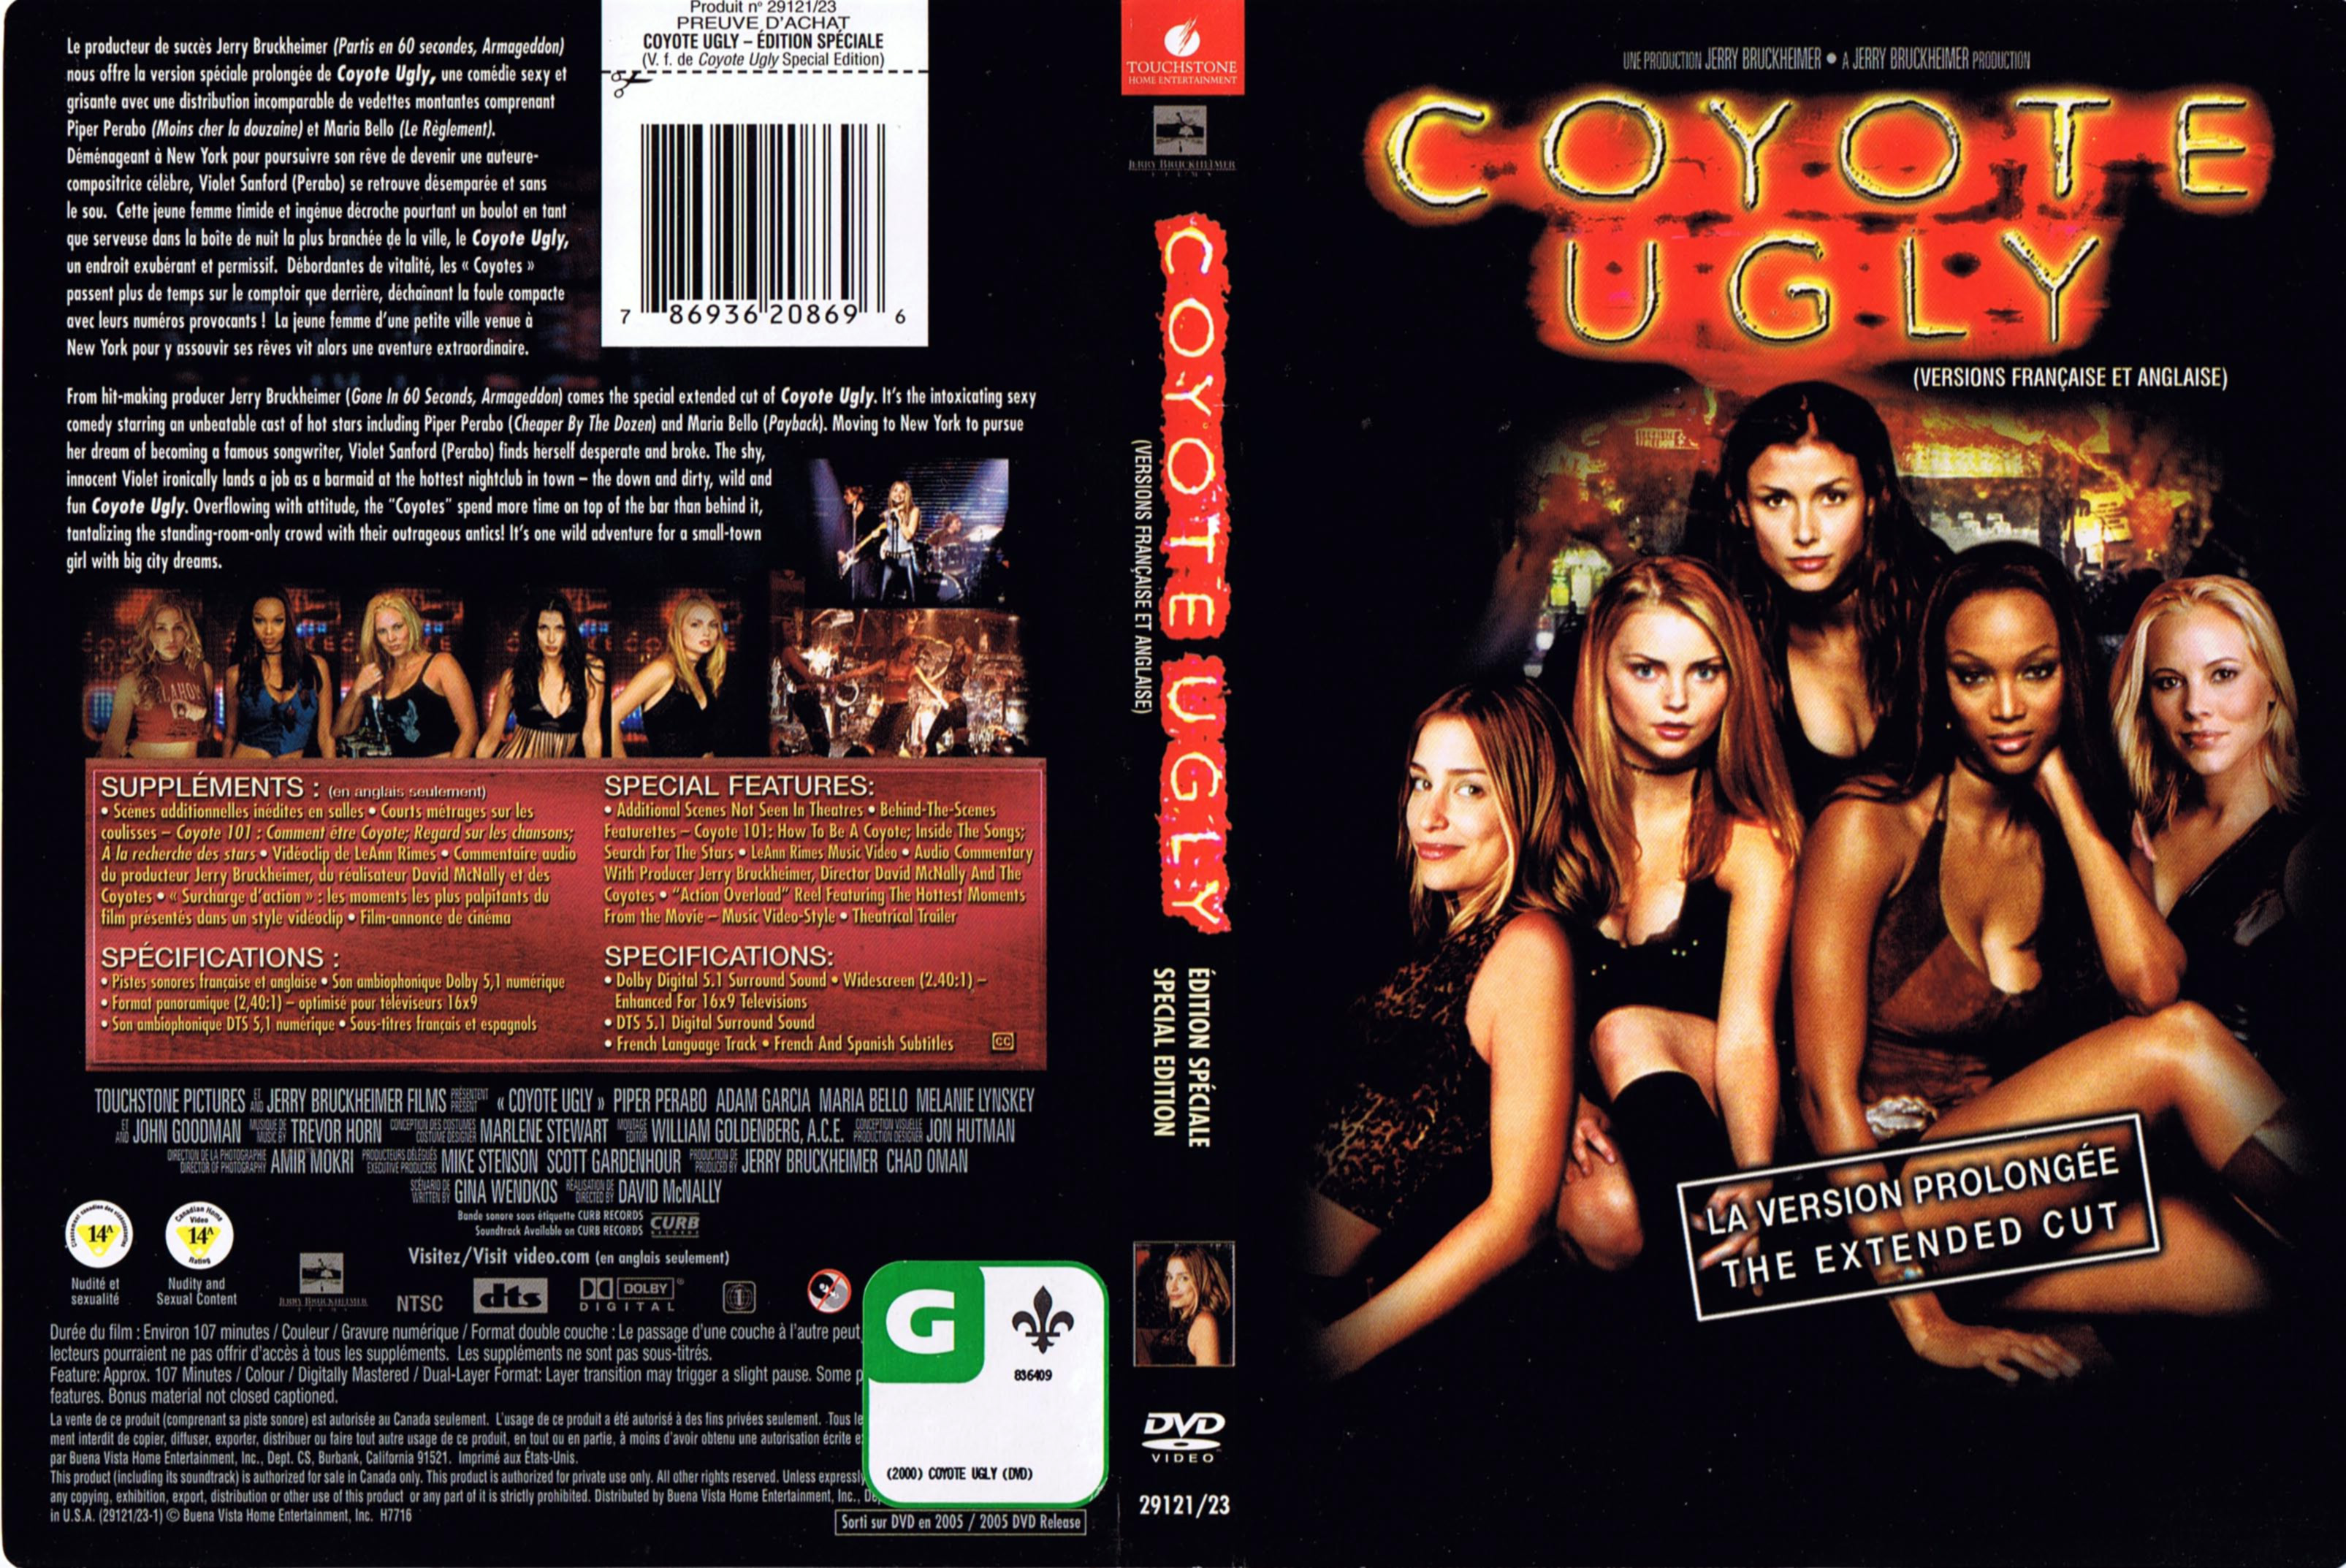 Jaquette DVD Coyote ugly (Canadienne)